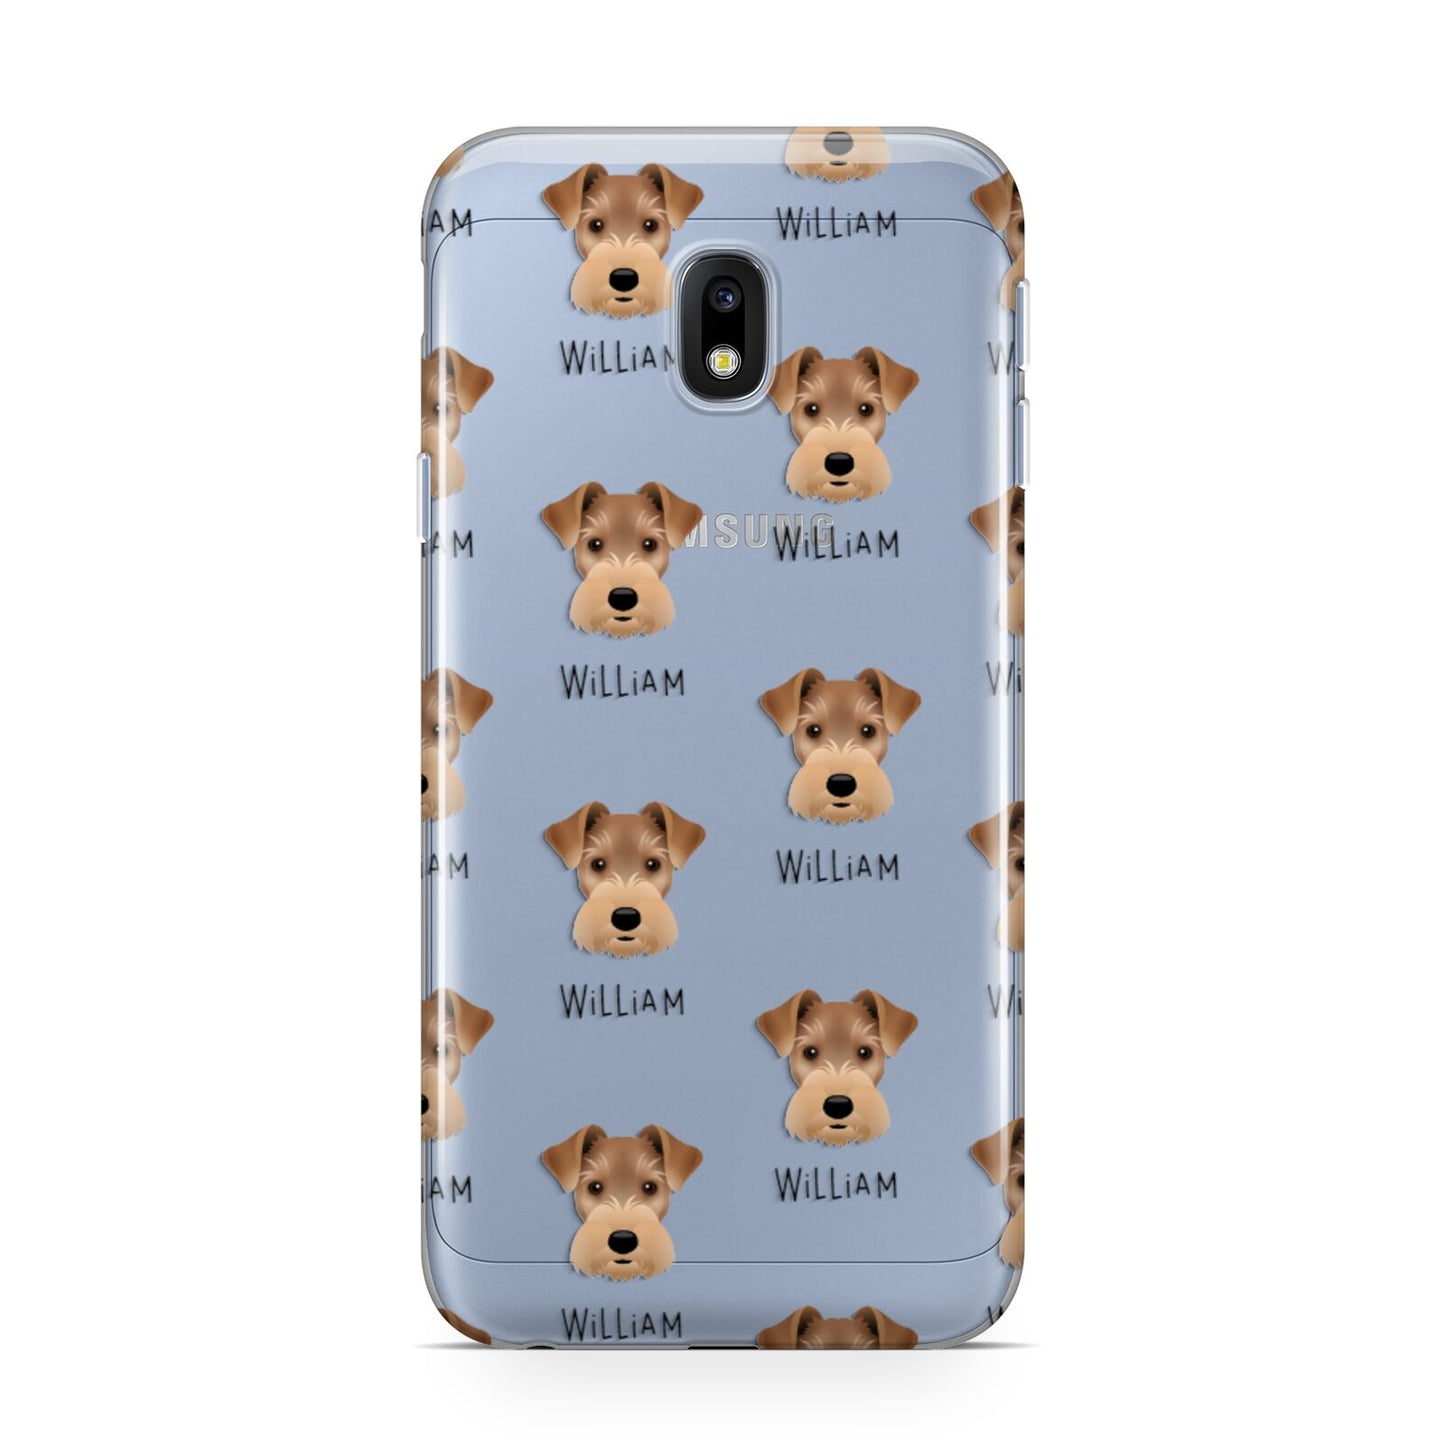 Welsh Terrier Icon with Name Samsung Galaxy J3 2017 Case